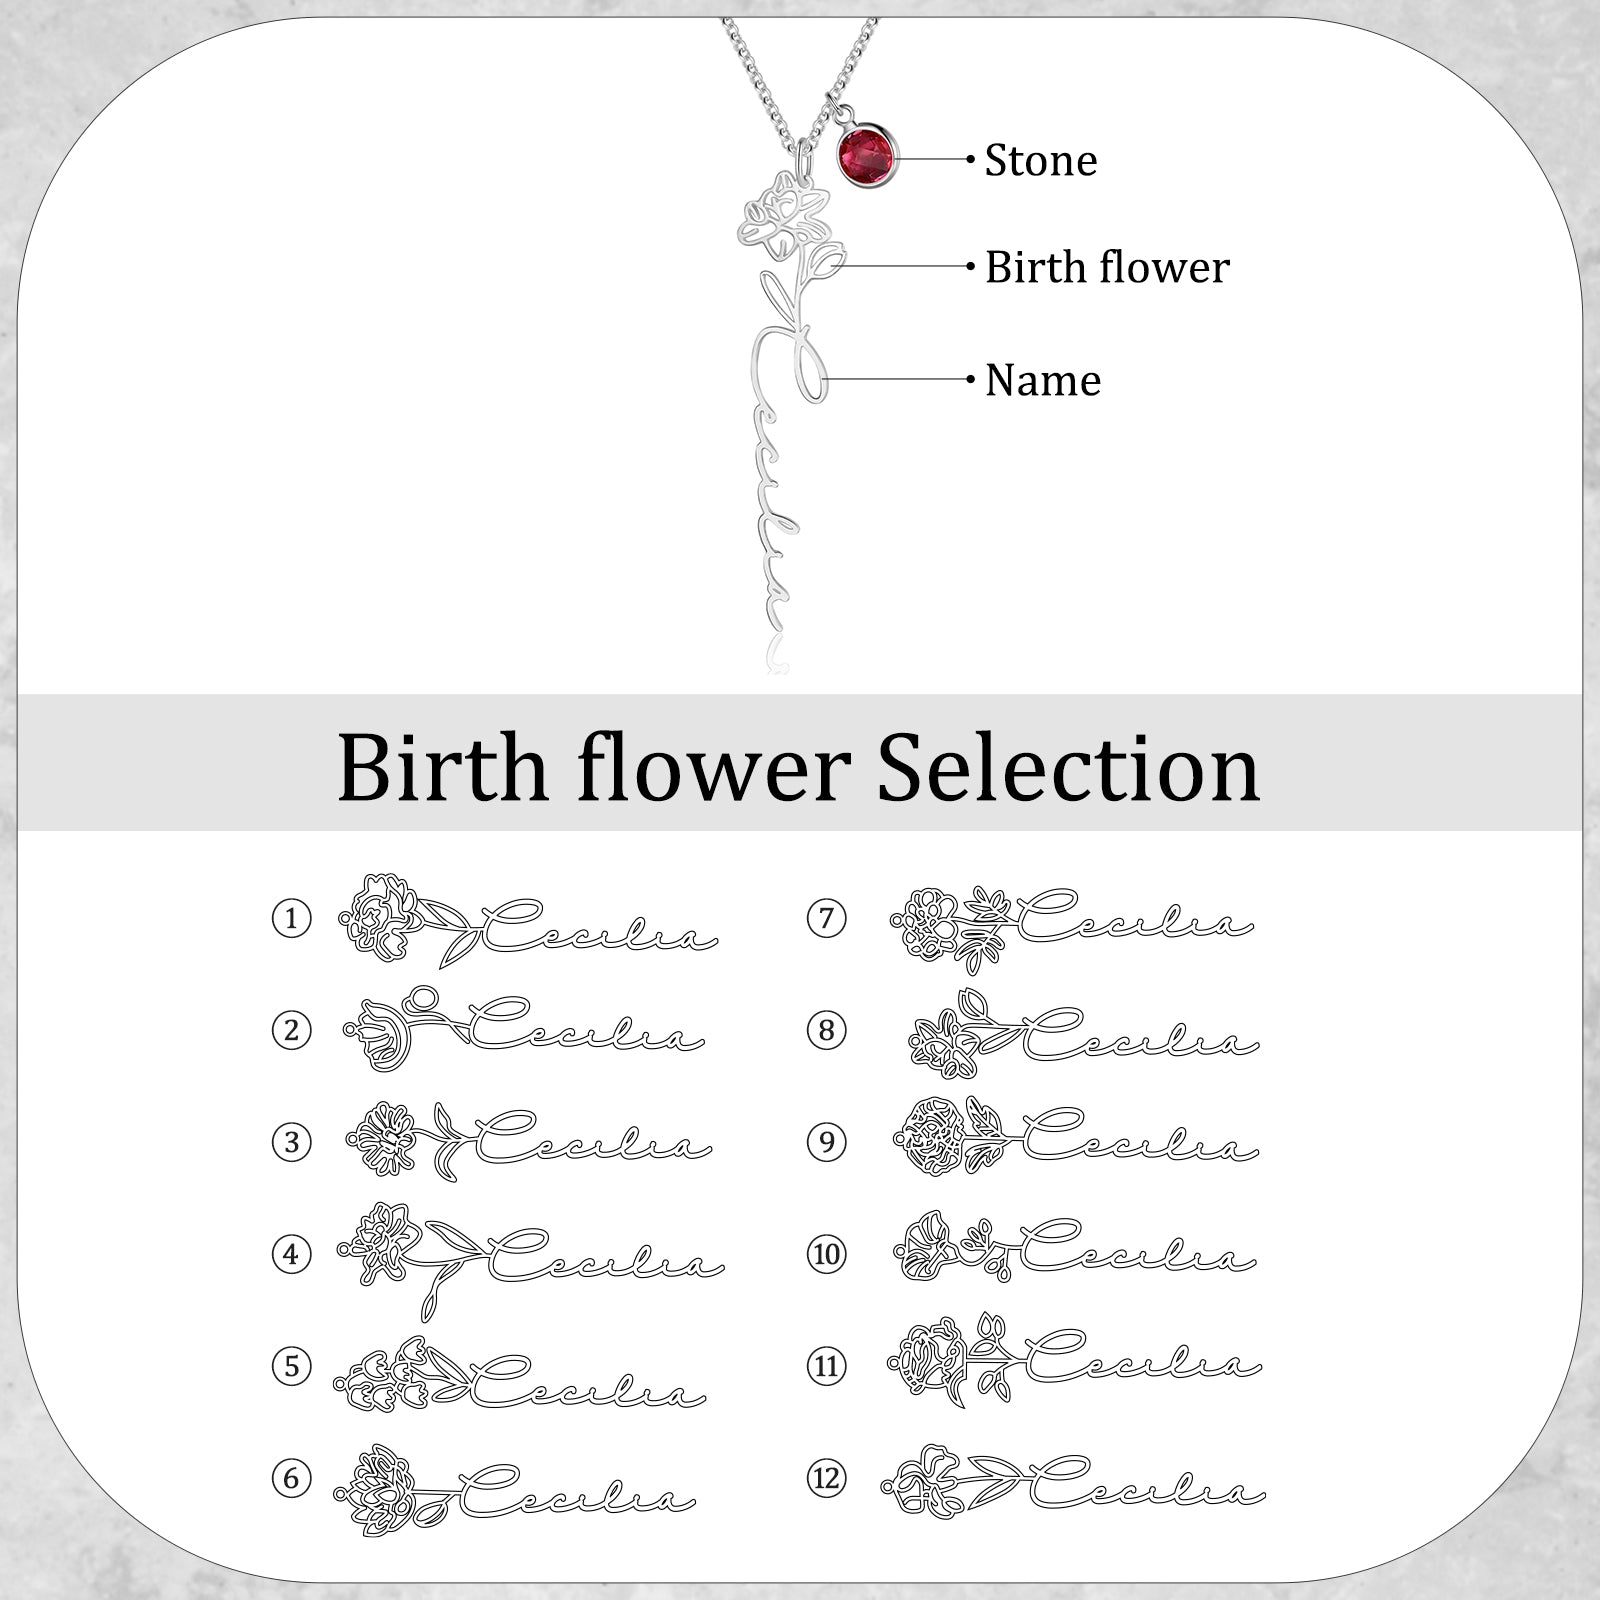 Personalized Birth Flower Necklace with Birthstone